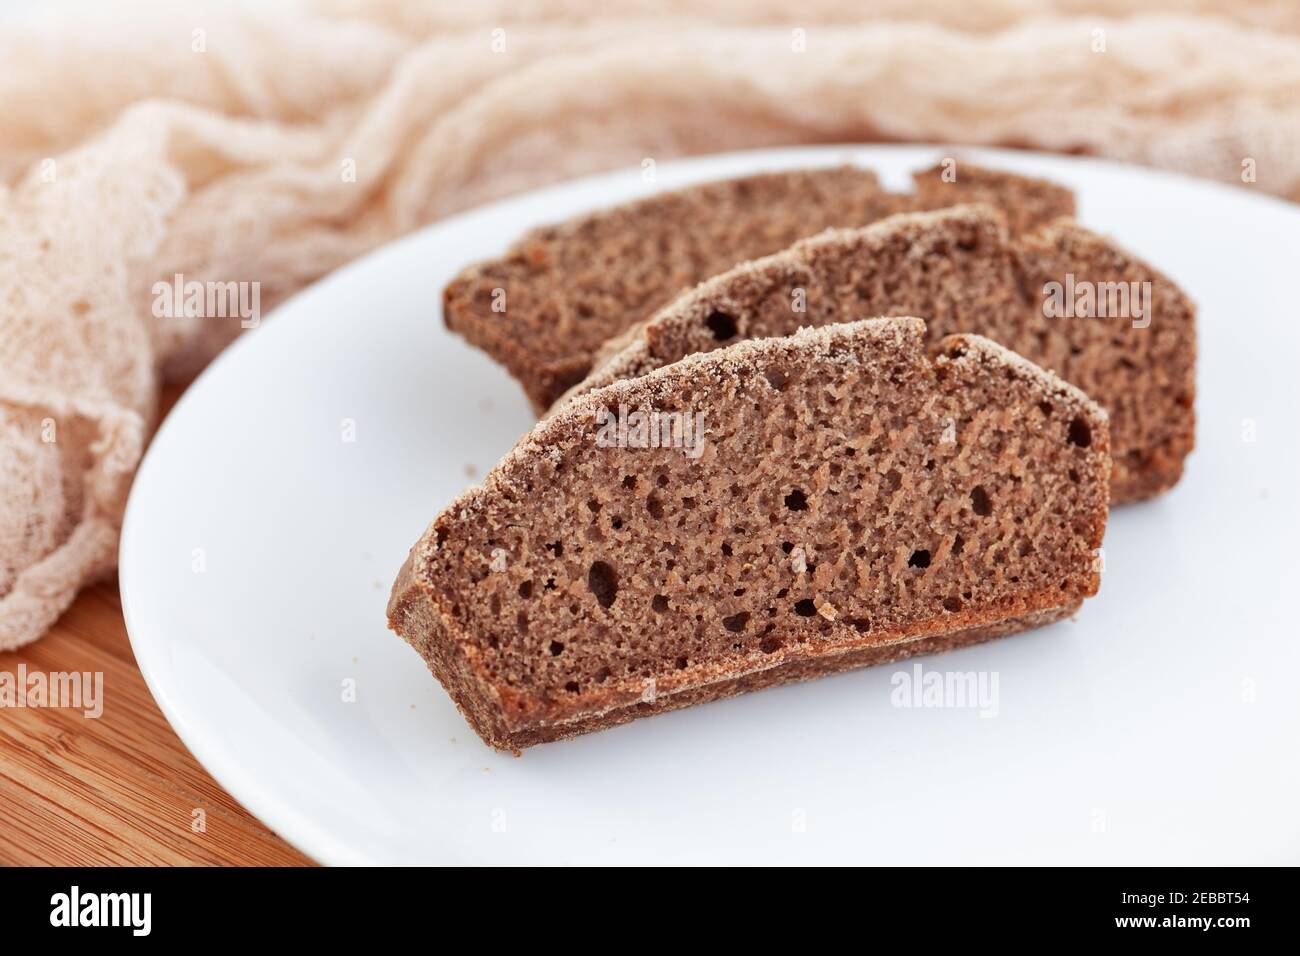 Slices of homemade gluten free bread. Close up. Stock Photo